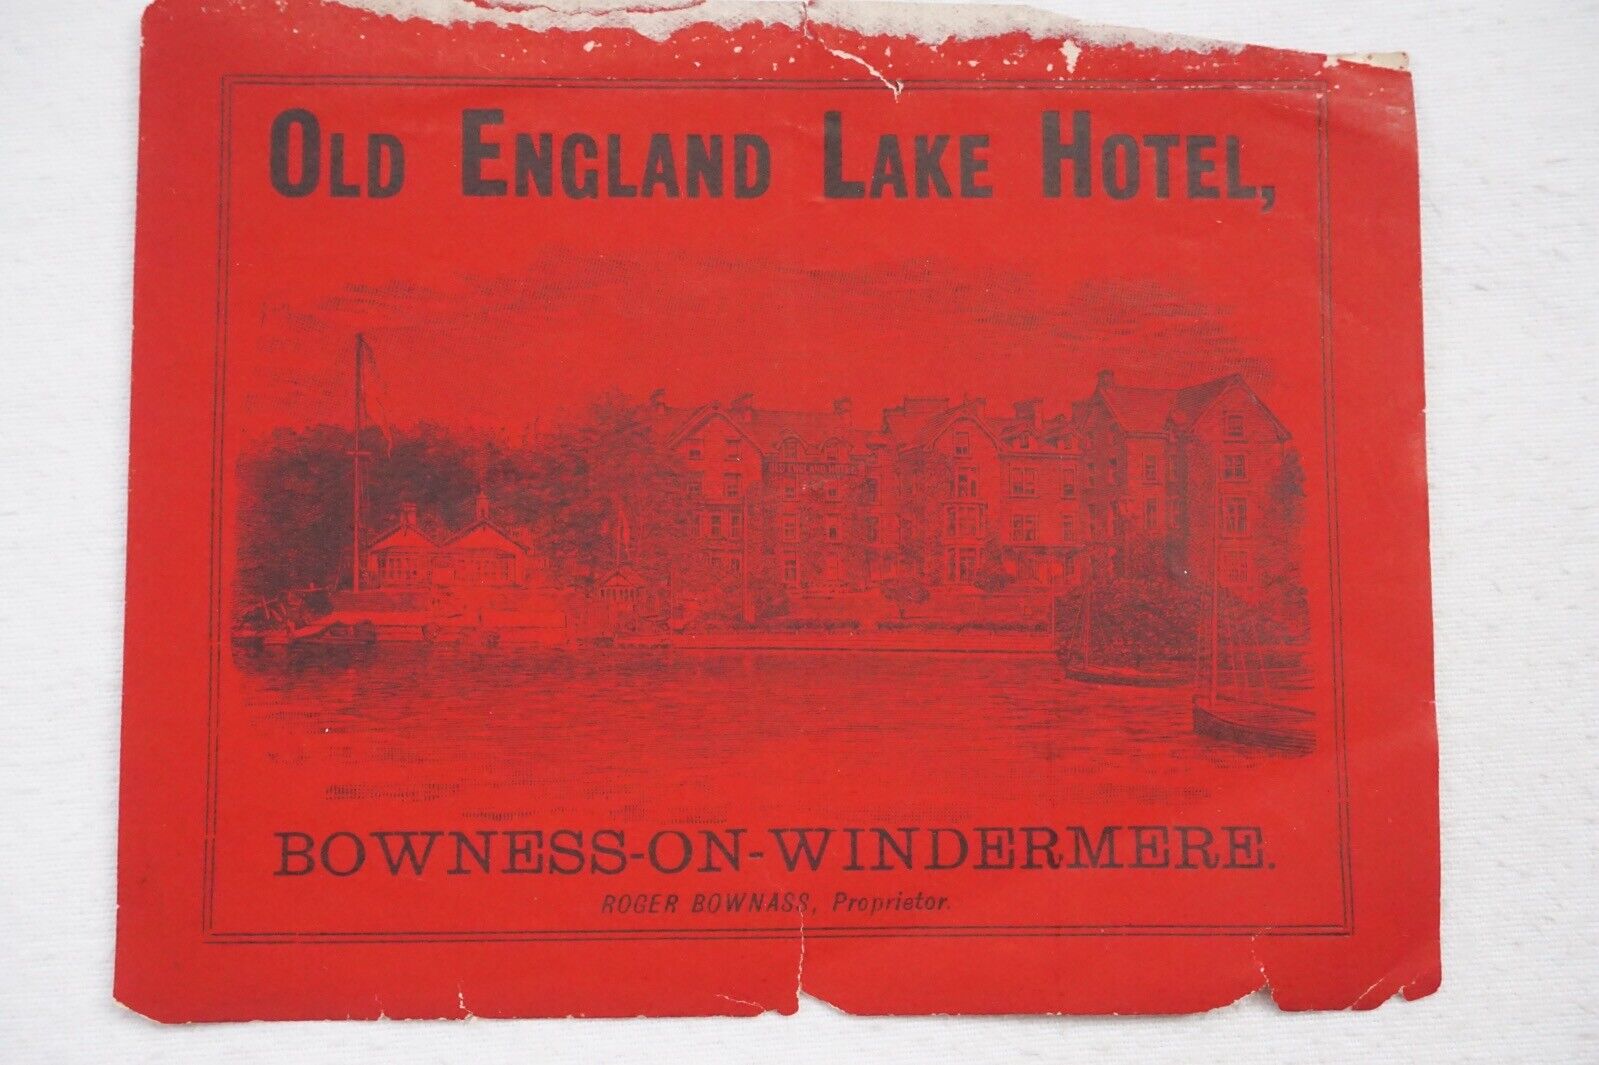 c1930s Old England Lake Hotel Railway Luggage Label Bowness On Windermere